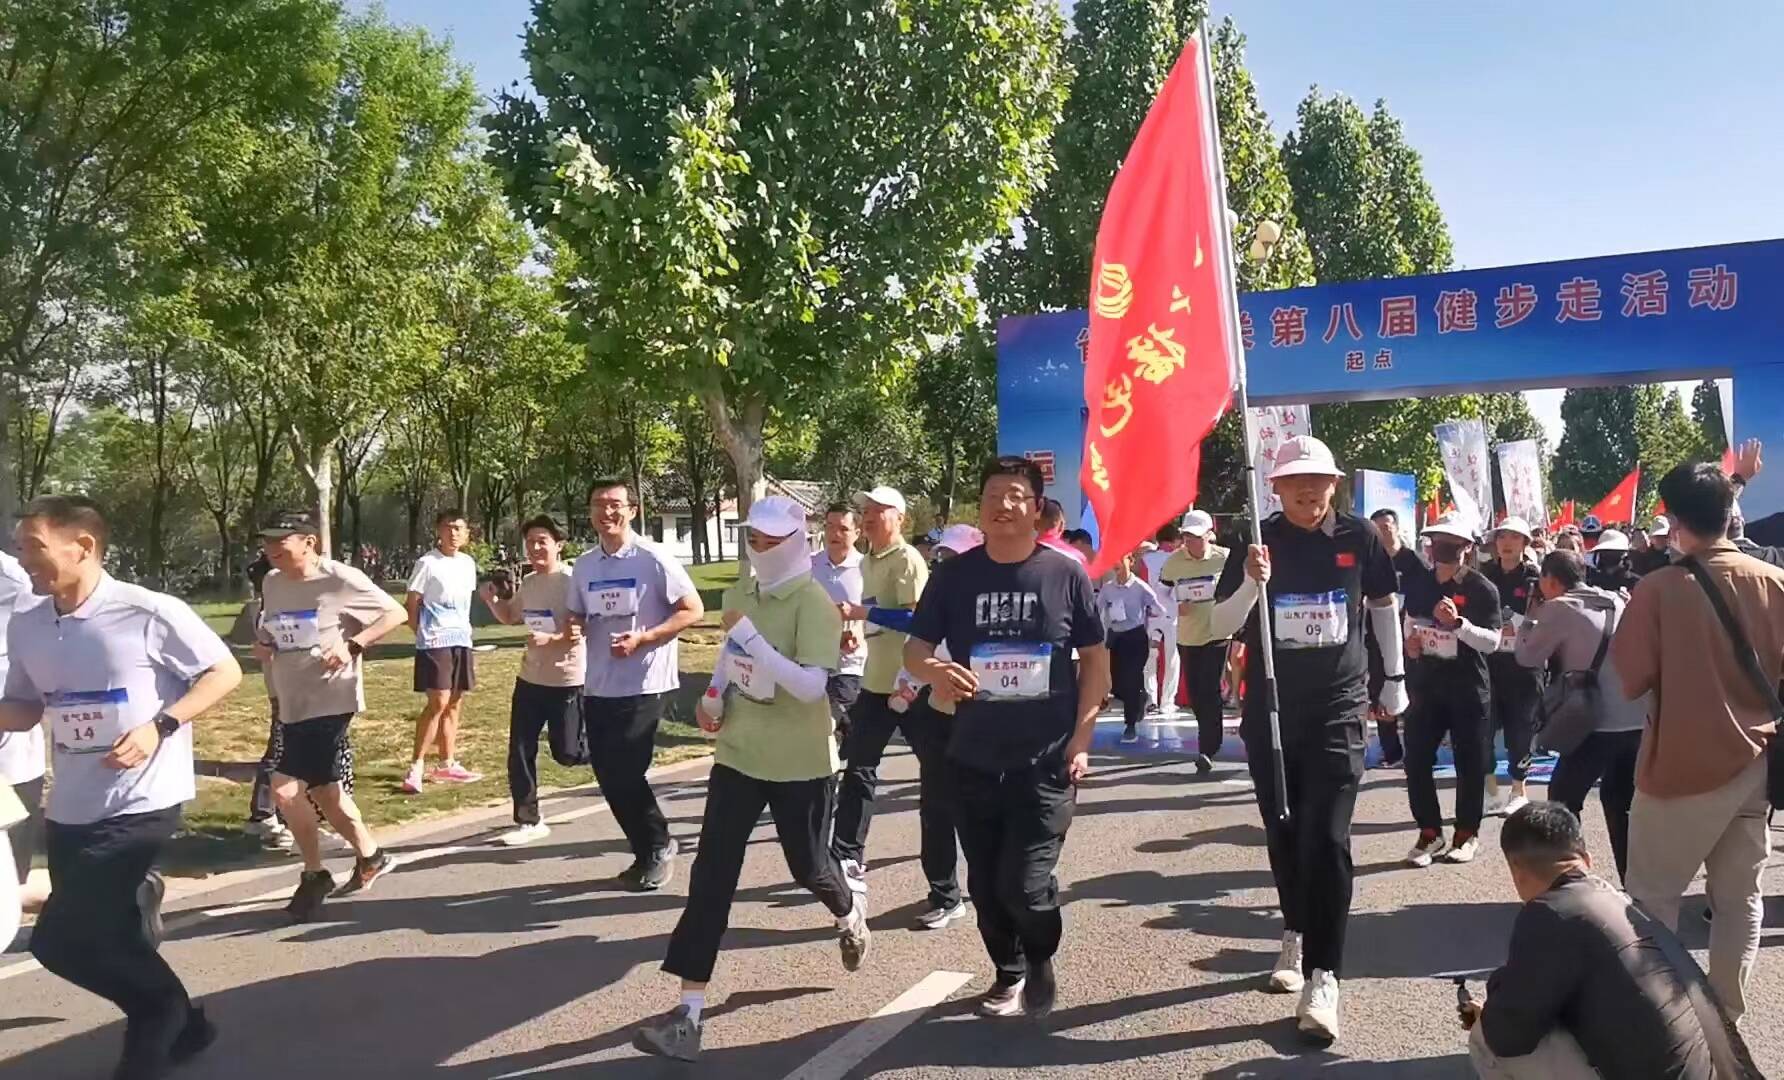  The eighth vigorous walking activity of provincial organs was held